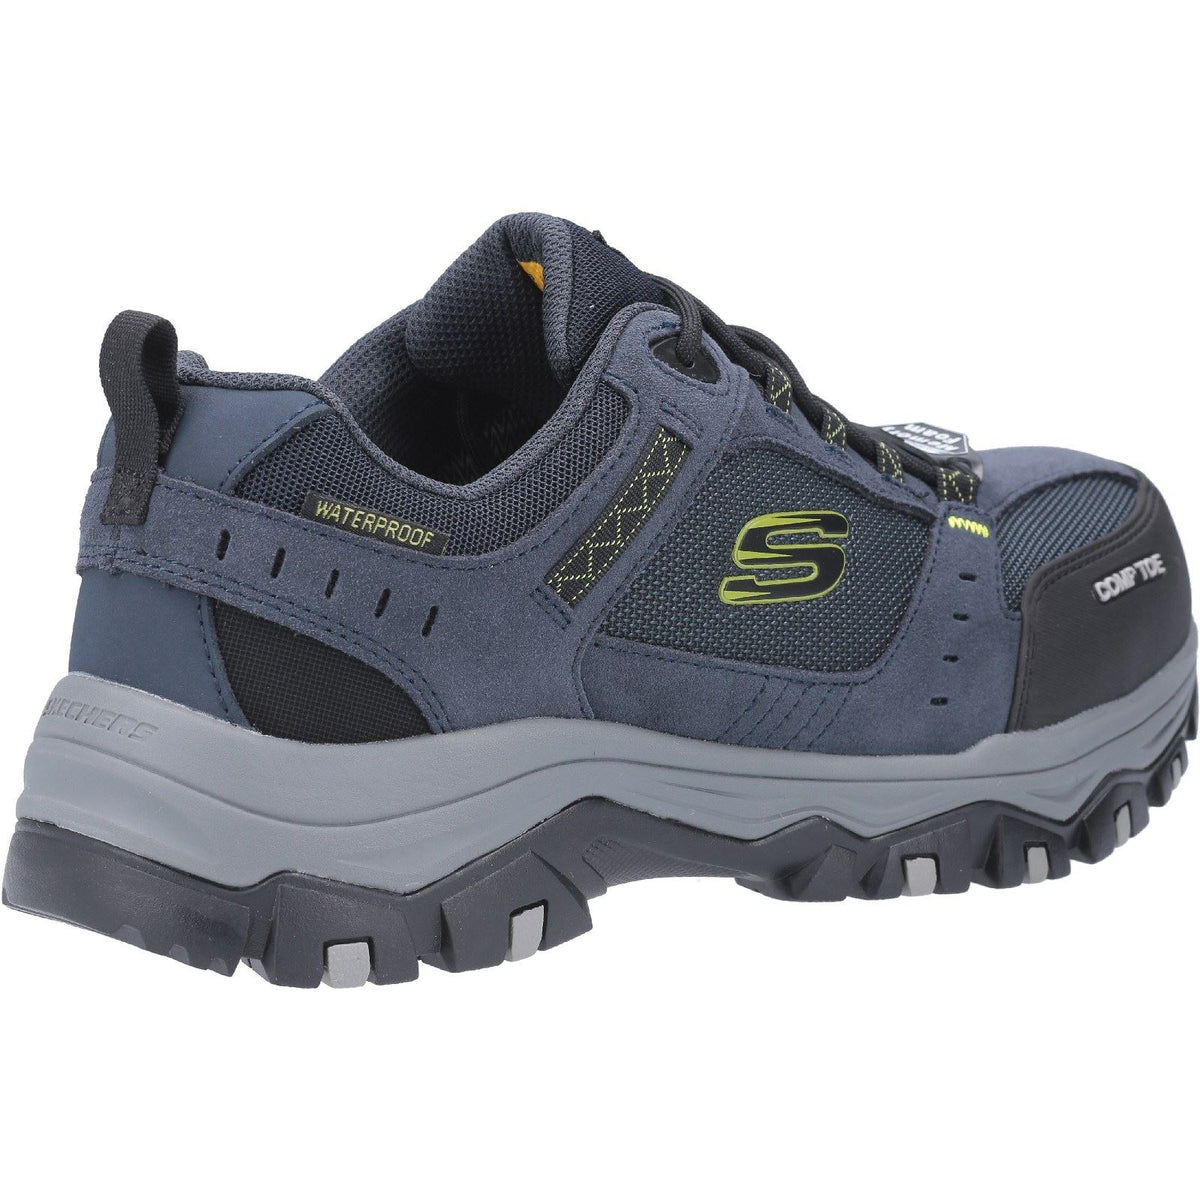 Skechers Greetah Safety Hiker Boots with Composite Toe